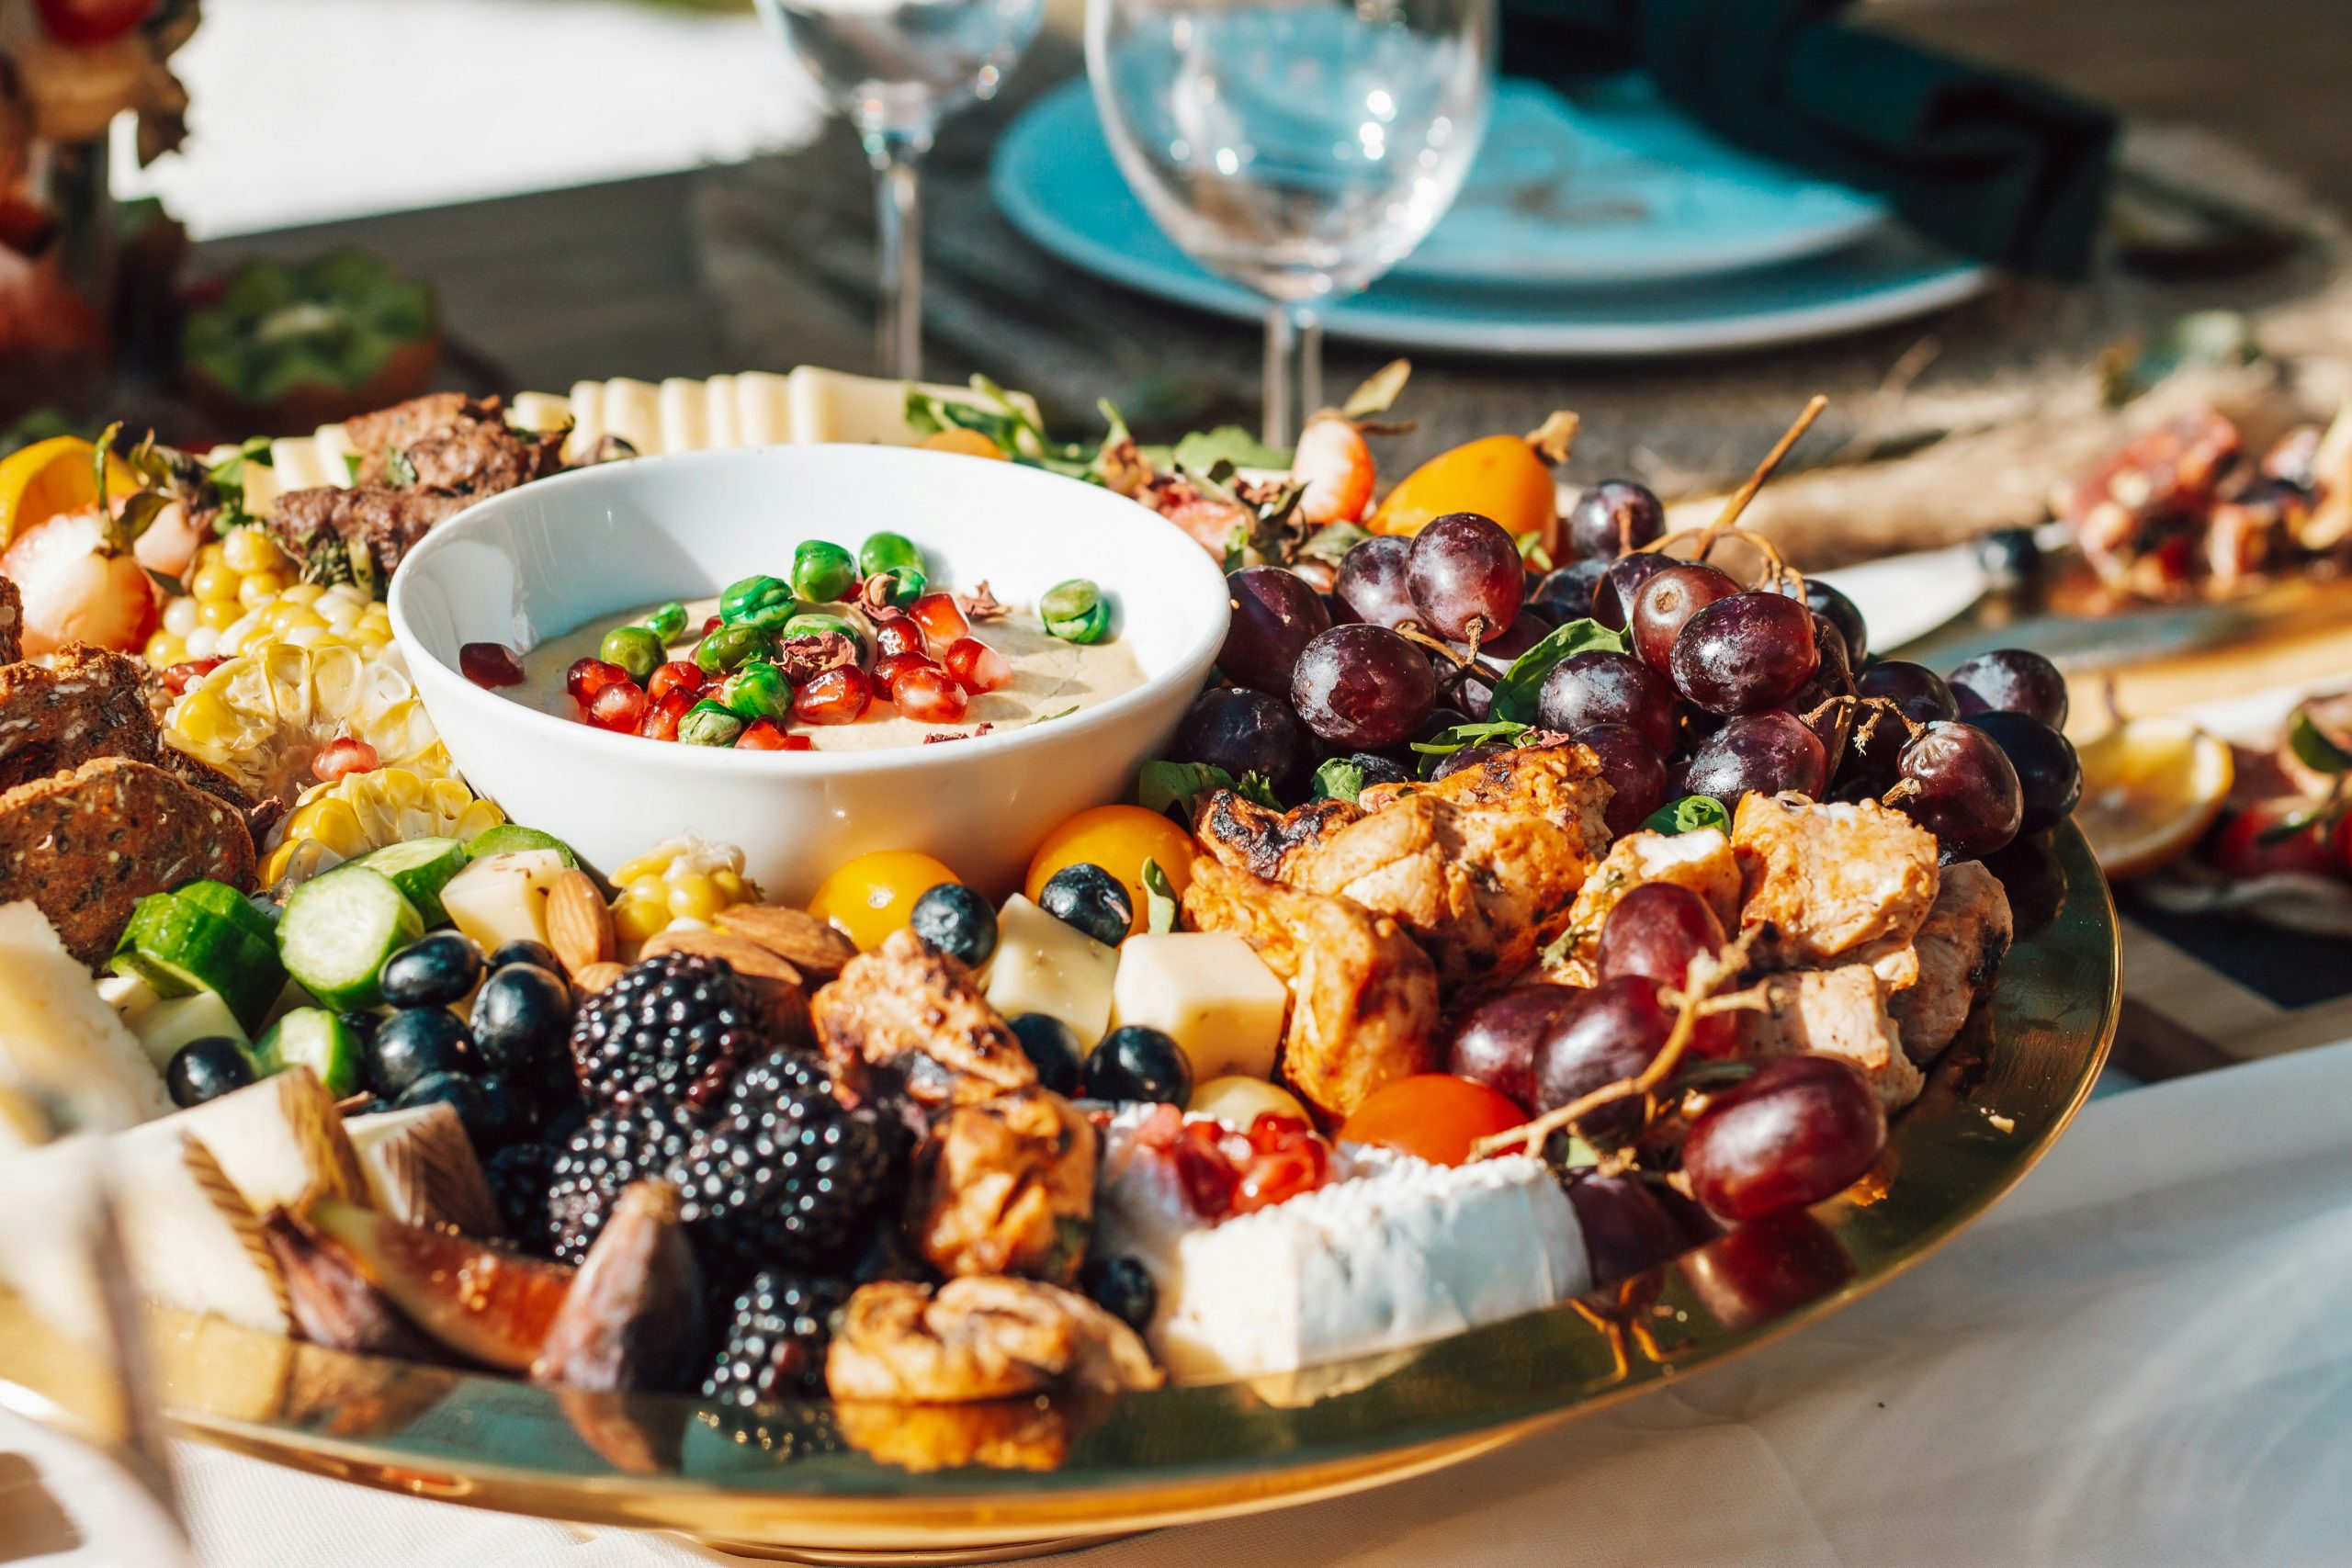 A Guide to Dietary Diverse Catering Platters